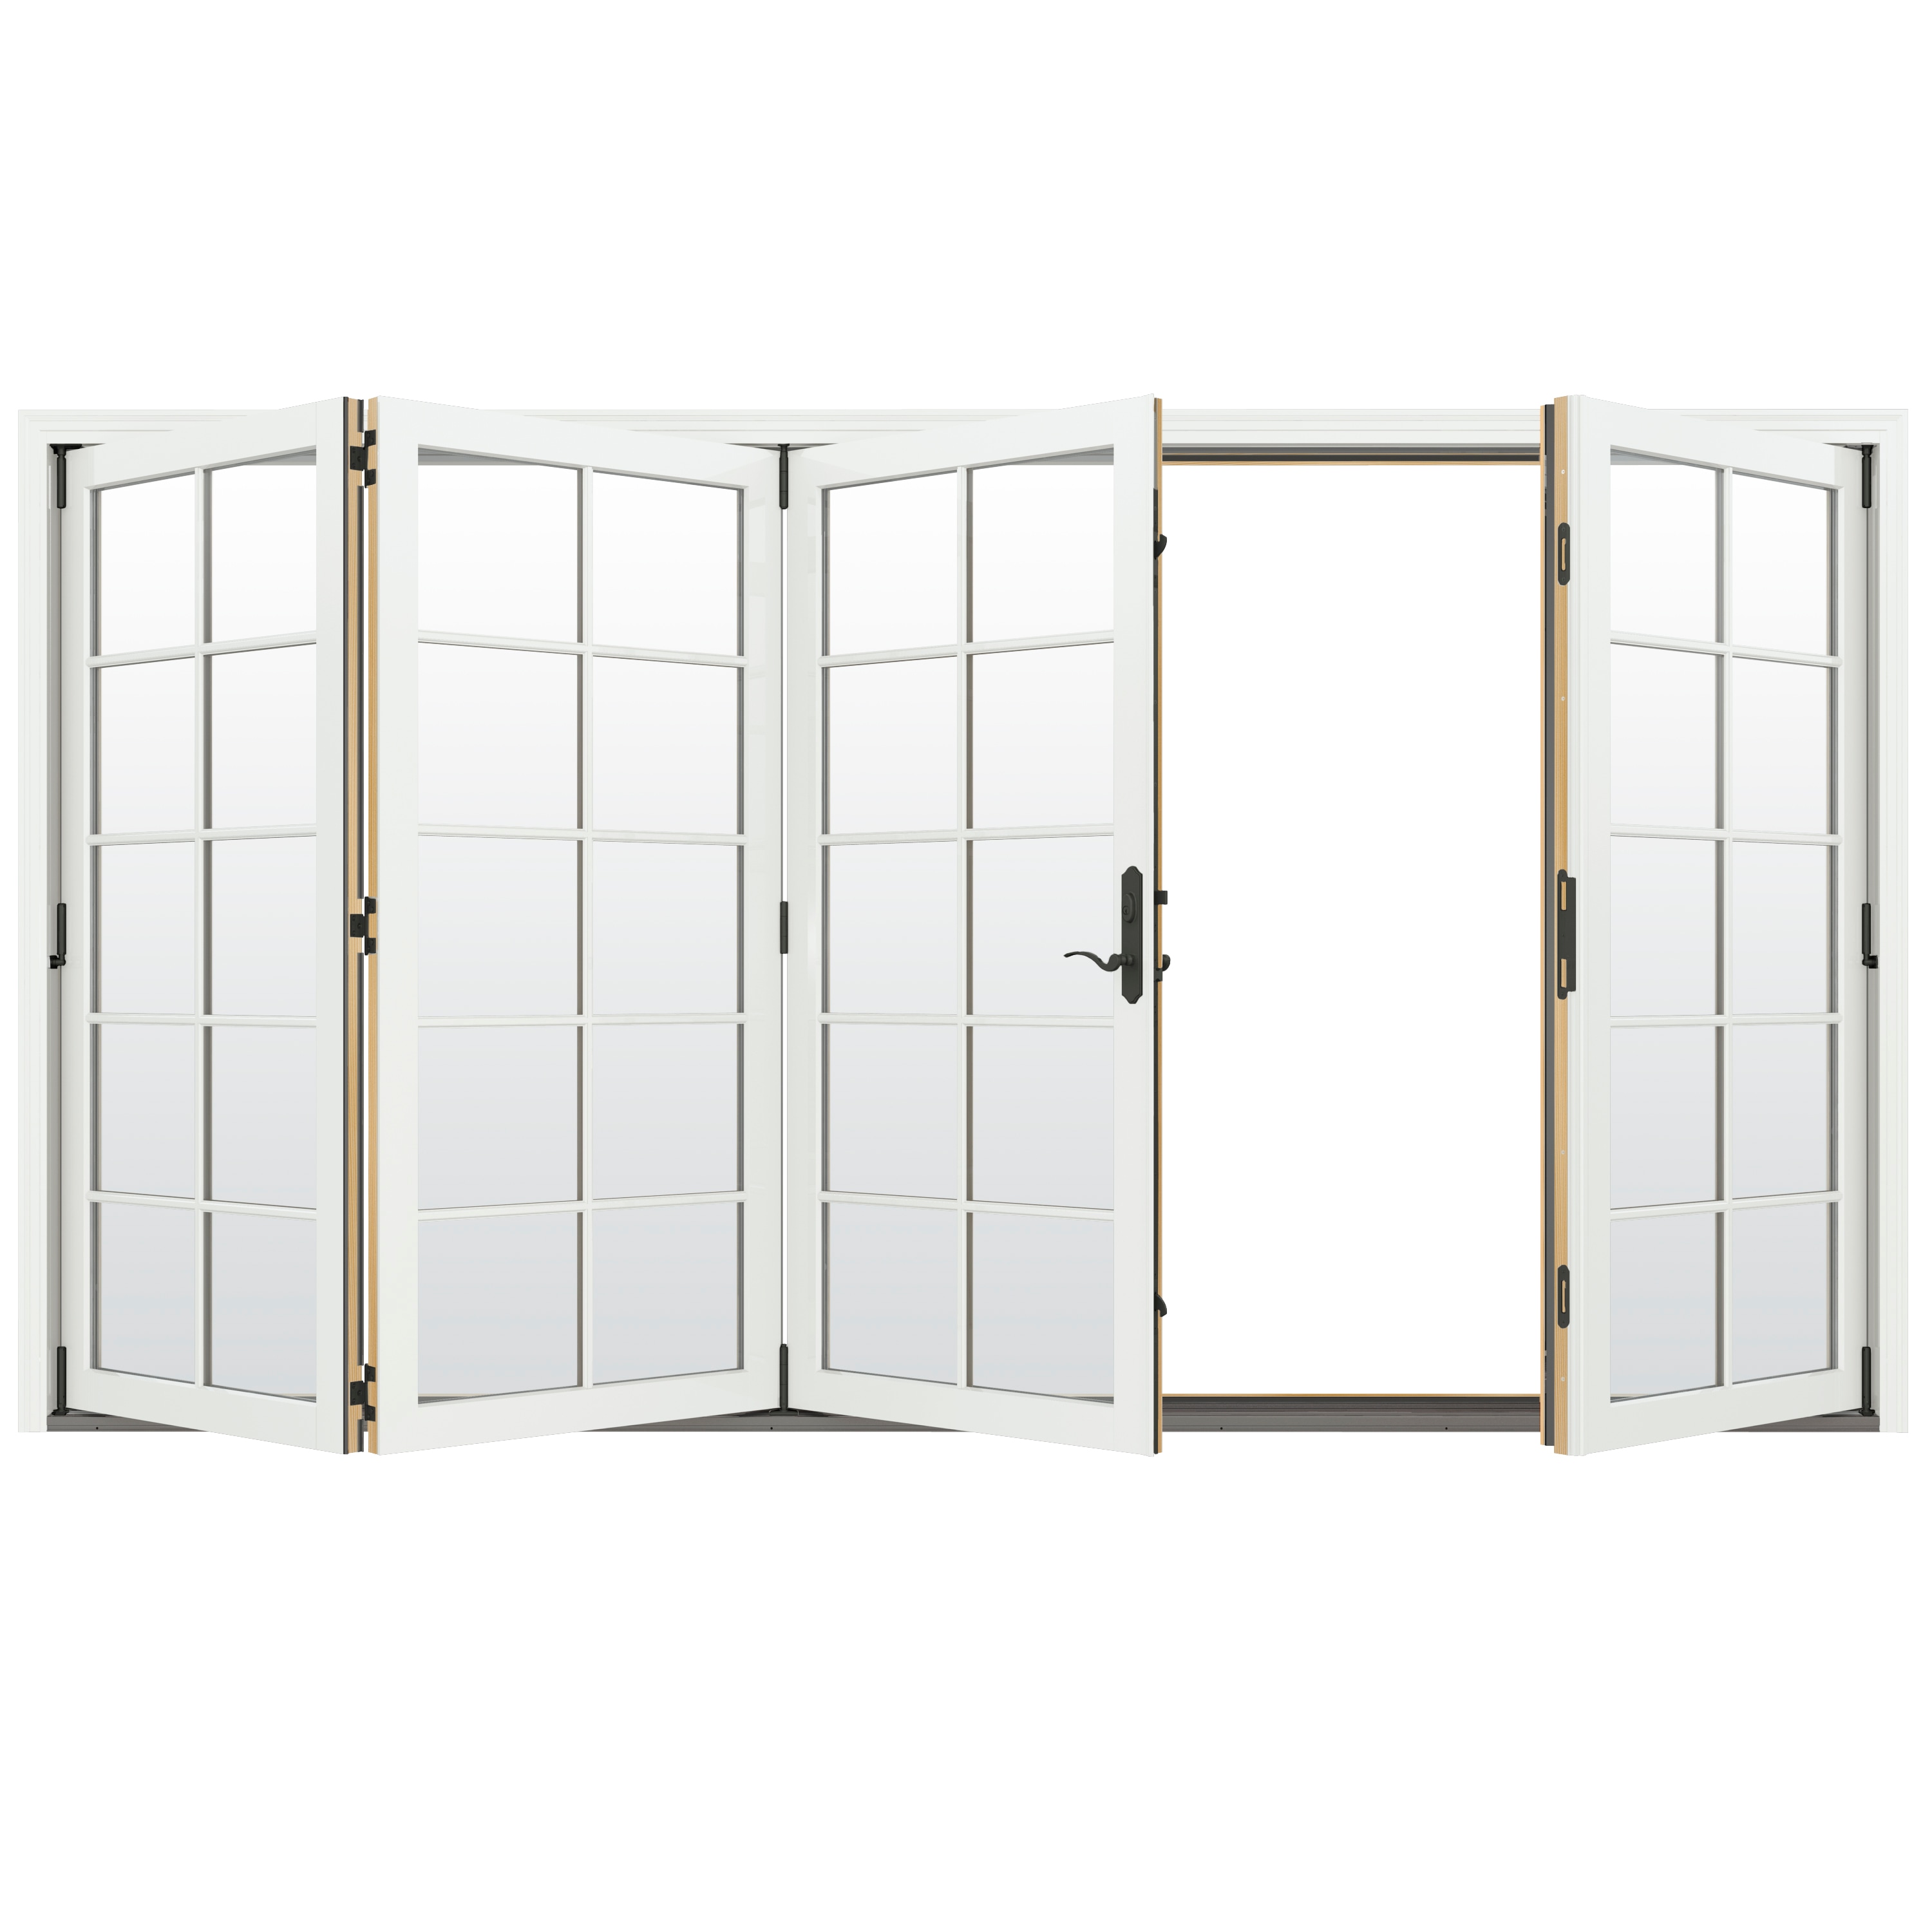 124-in x 80-in Low-e Argon Simulated Divided Light White Clad-wood Folding Left-Hand Outswing Patio Door | - JELD-WEN LOWOLJW247800091